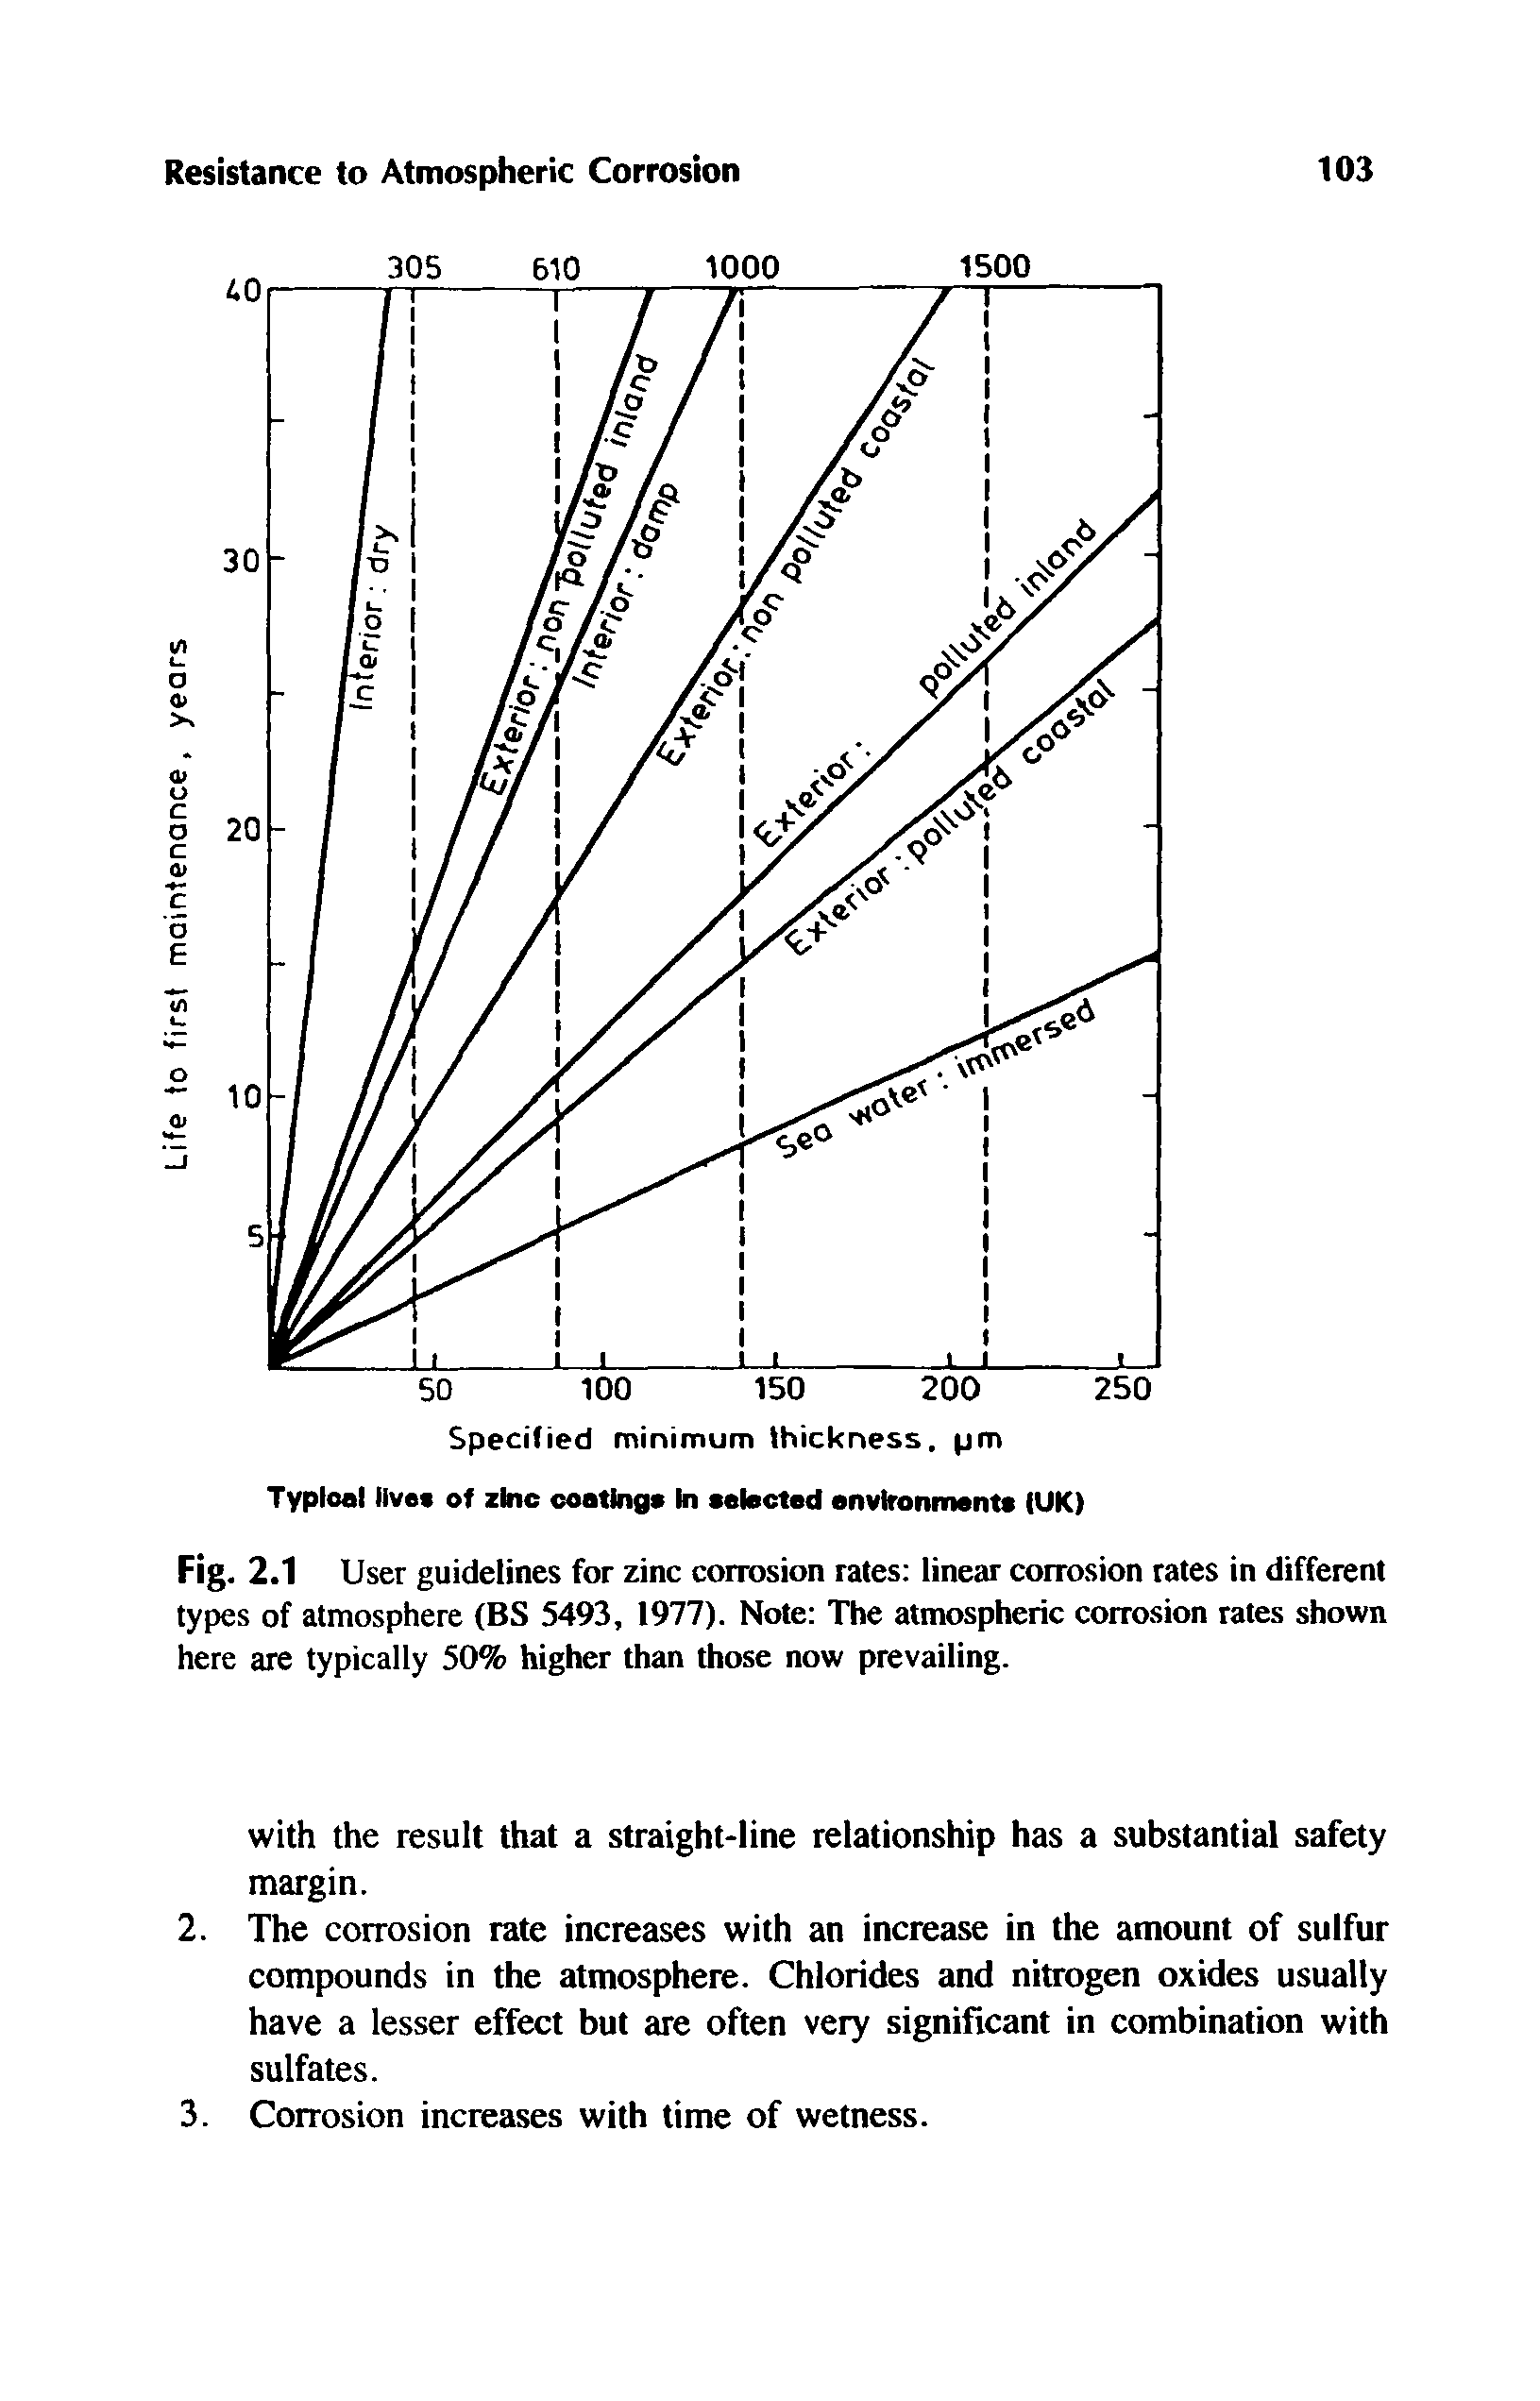 Fig. 2.1 User guidelines for zinc corrosion rates linear corrosion rates in different types of atmosphere (BS 5493, 1977). Note The atmospheric corrosion rates shown here are typically 50% higher than those now prevailing.